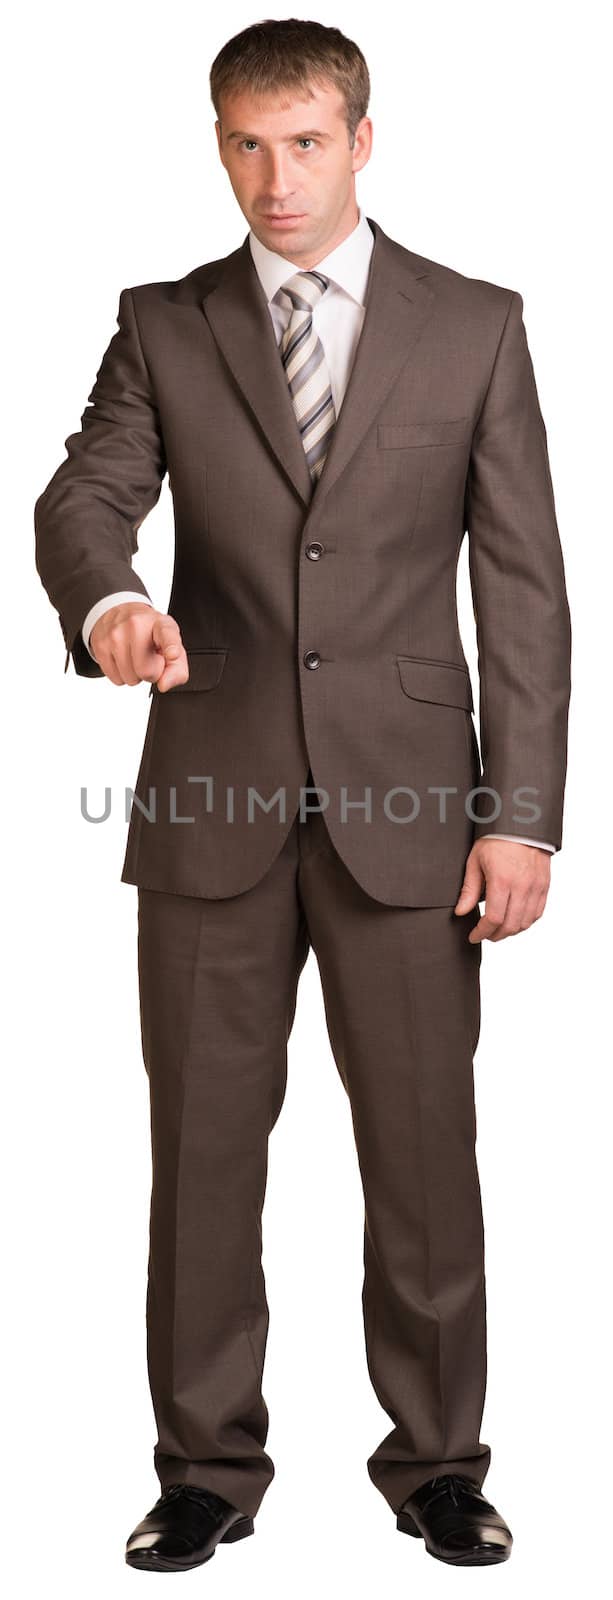 Businessman holding hand up in front of him. Isolated on white background.